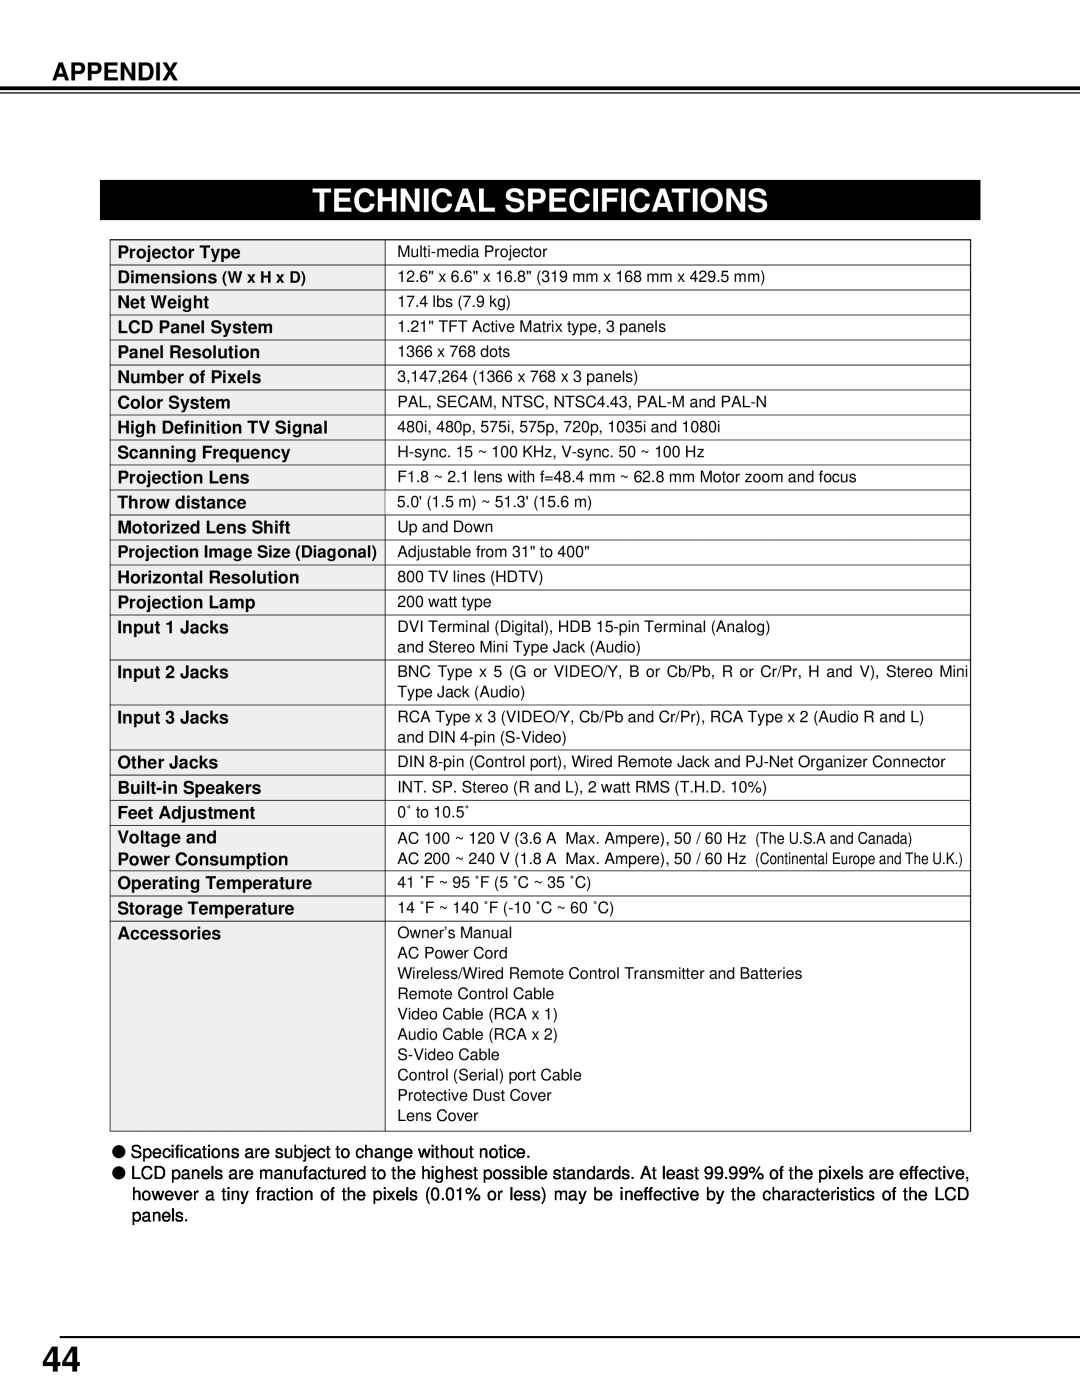 Sanyo PLV-70 owner manual Technical Specifications, Appendix 